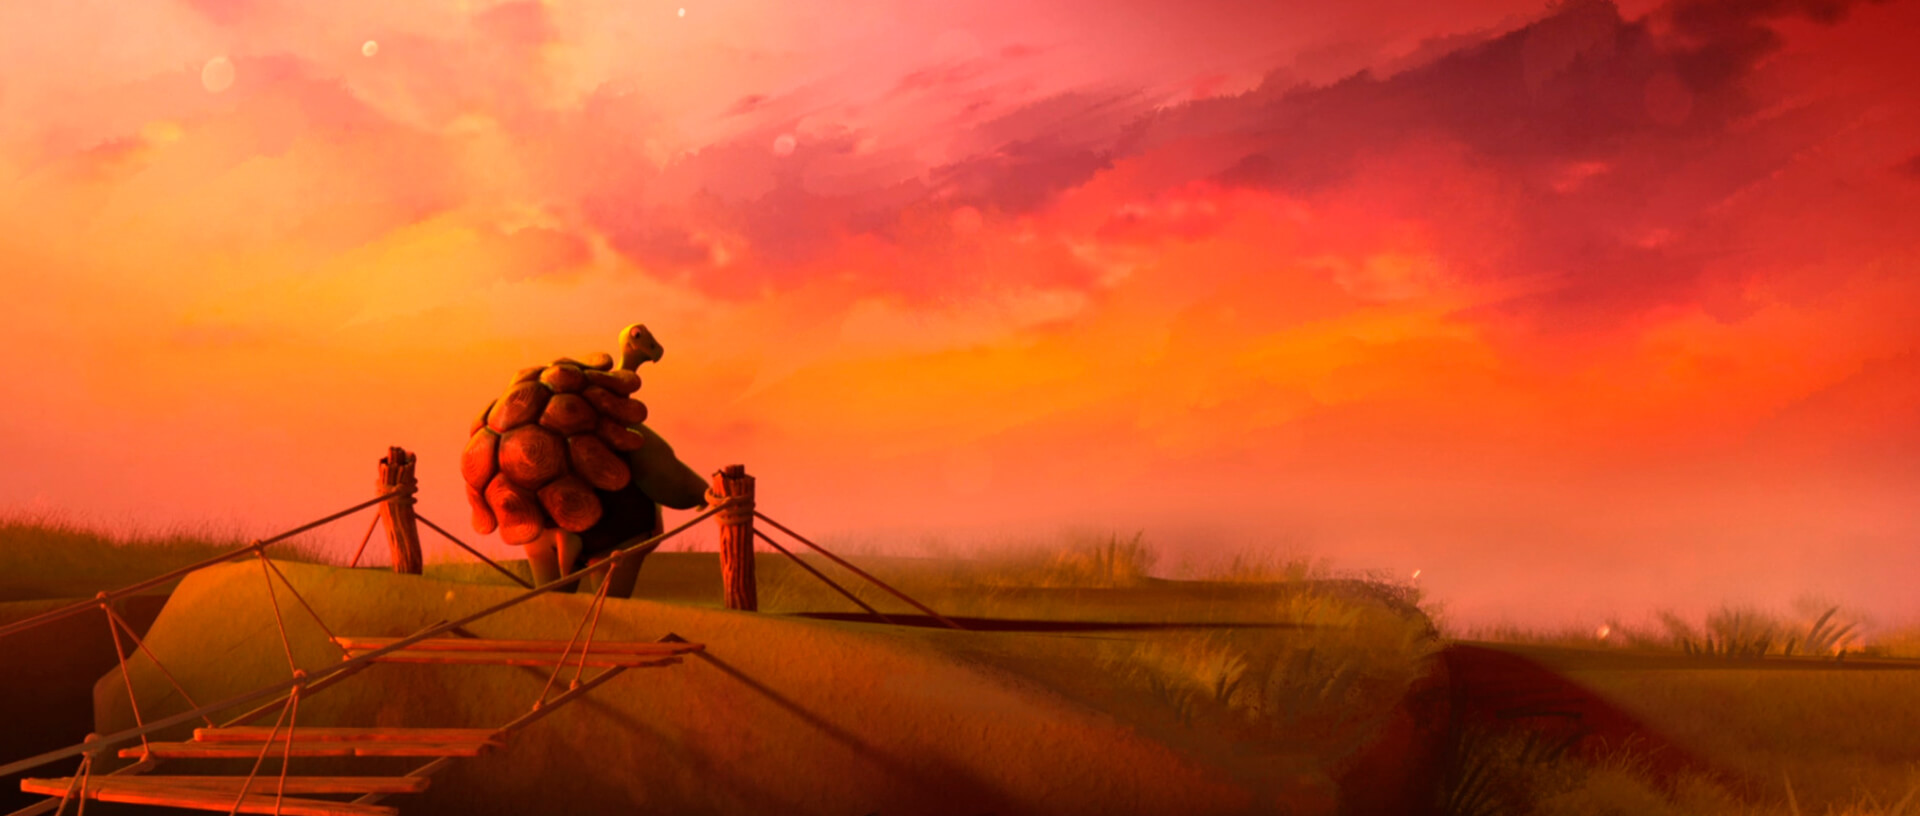 Turtle character with a backpack after crossing a bridge, looking at the distance, with a vibrant sunset sky.